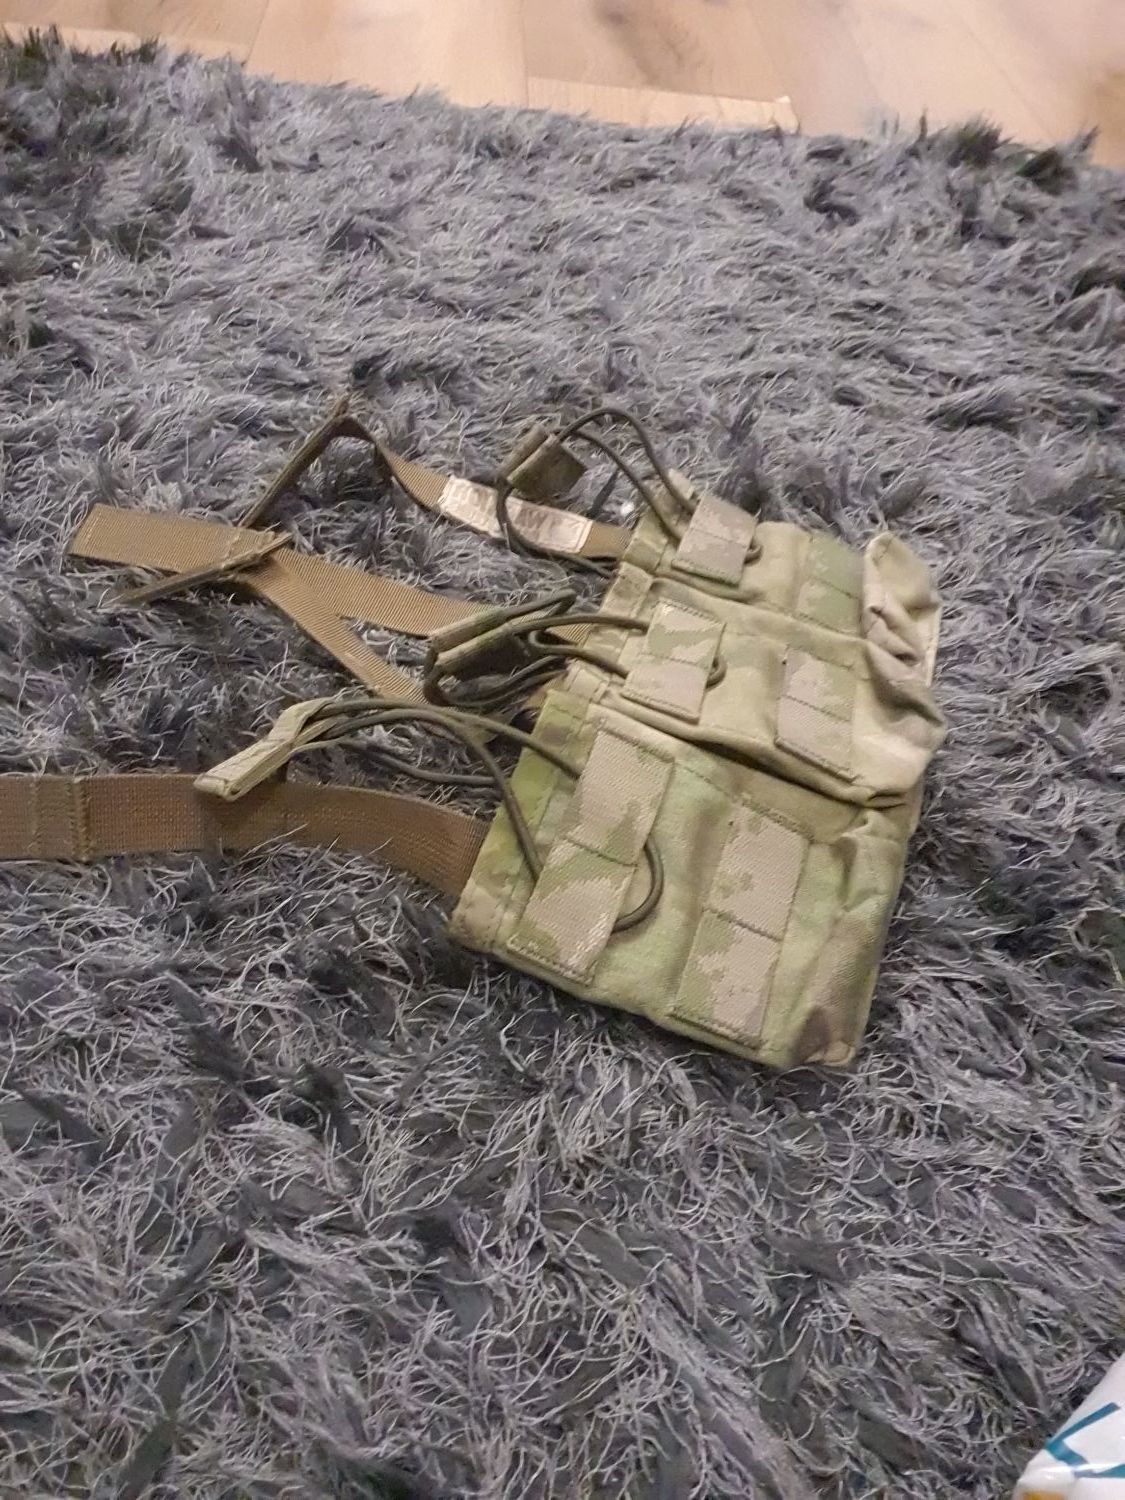 Warrior assault systems mag pouch - Gear - Airsoft Forums UK